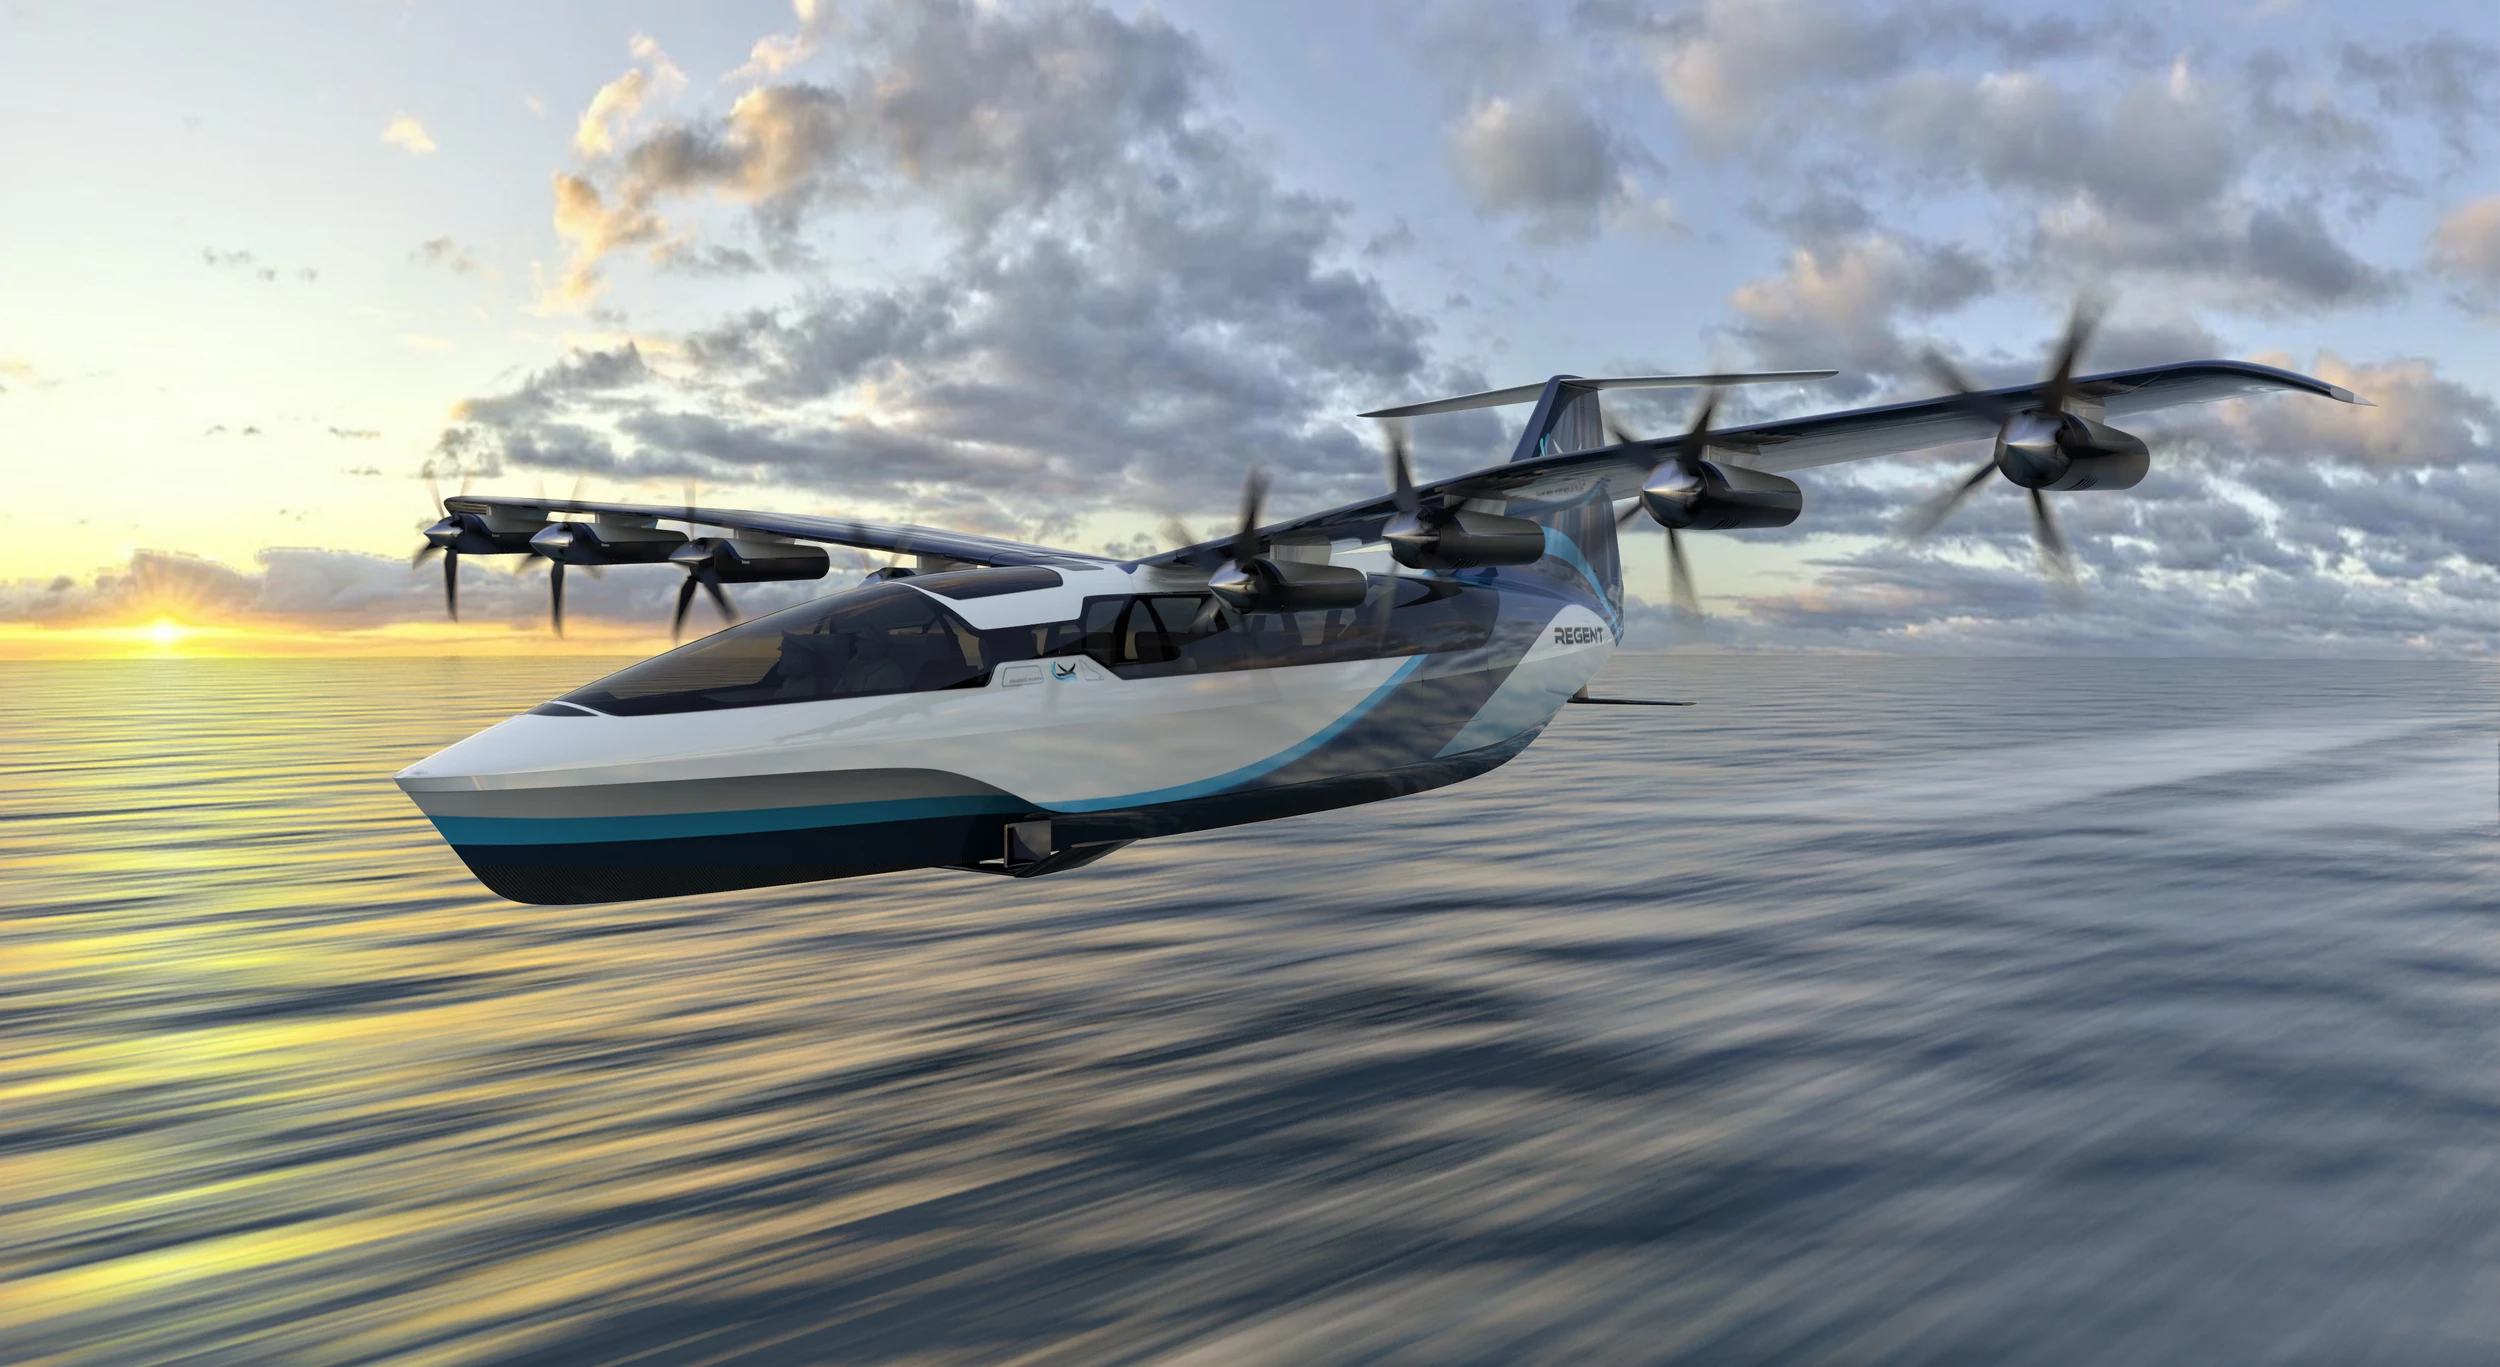 Invented in Boston Part Ferry, Part Plane Glides Above Water photo